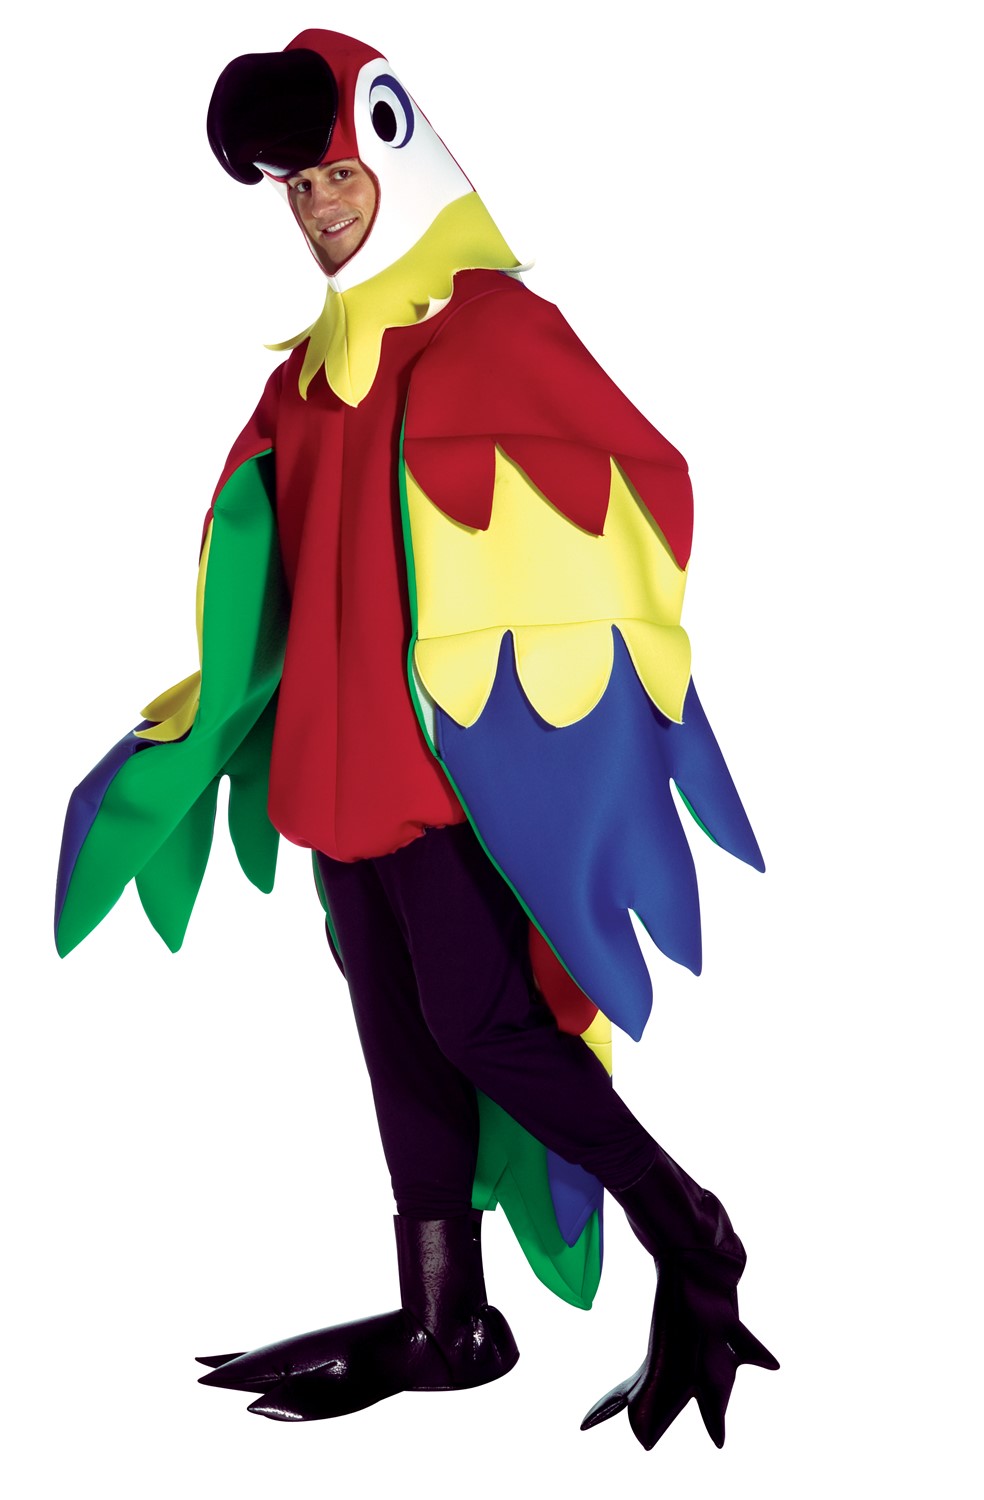 Parrot Adult Deluxe Costume